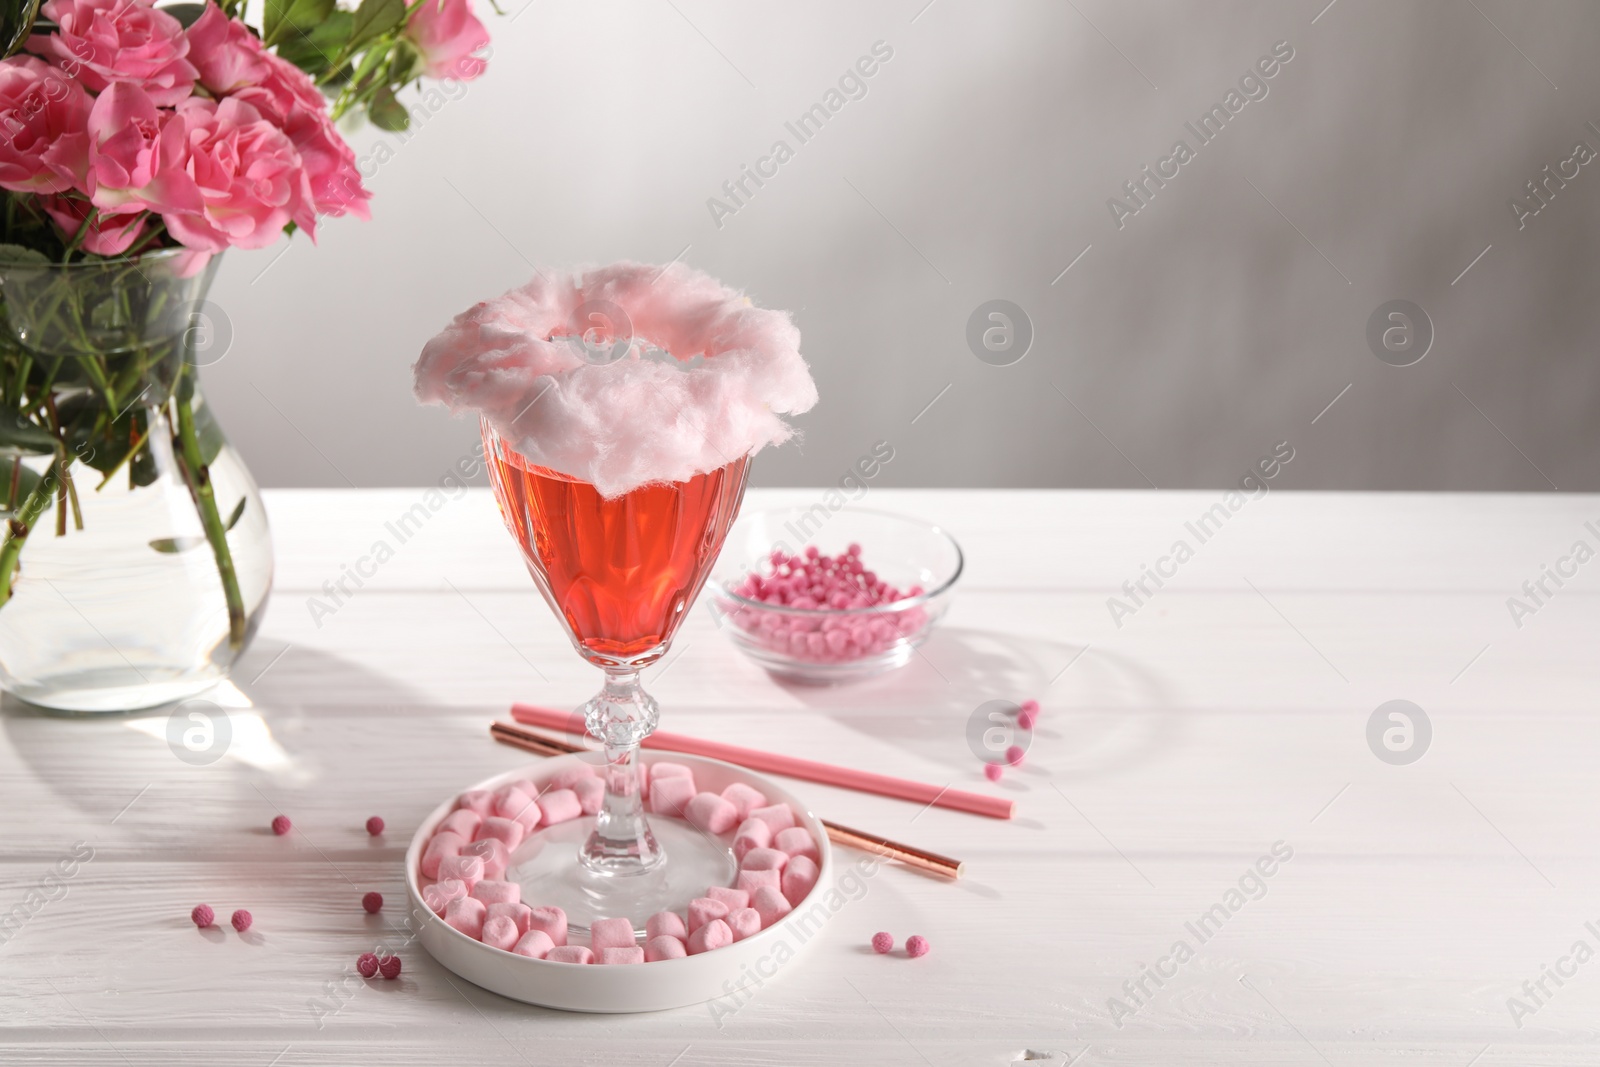 Photo of Cotton candy cocktail in glass, marshmallows, vase with pink roses and straws on white wooden table against gray background, space for text